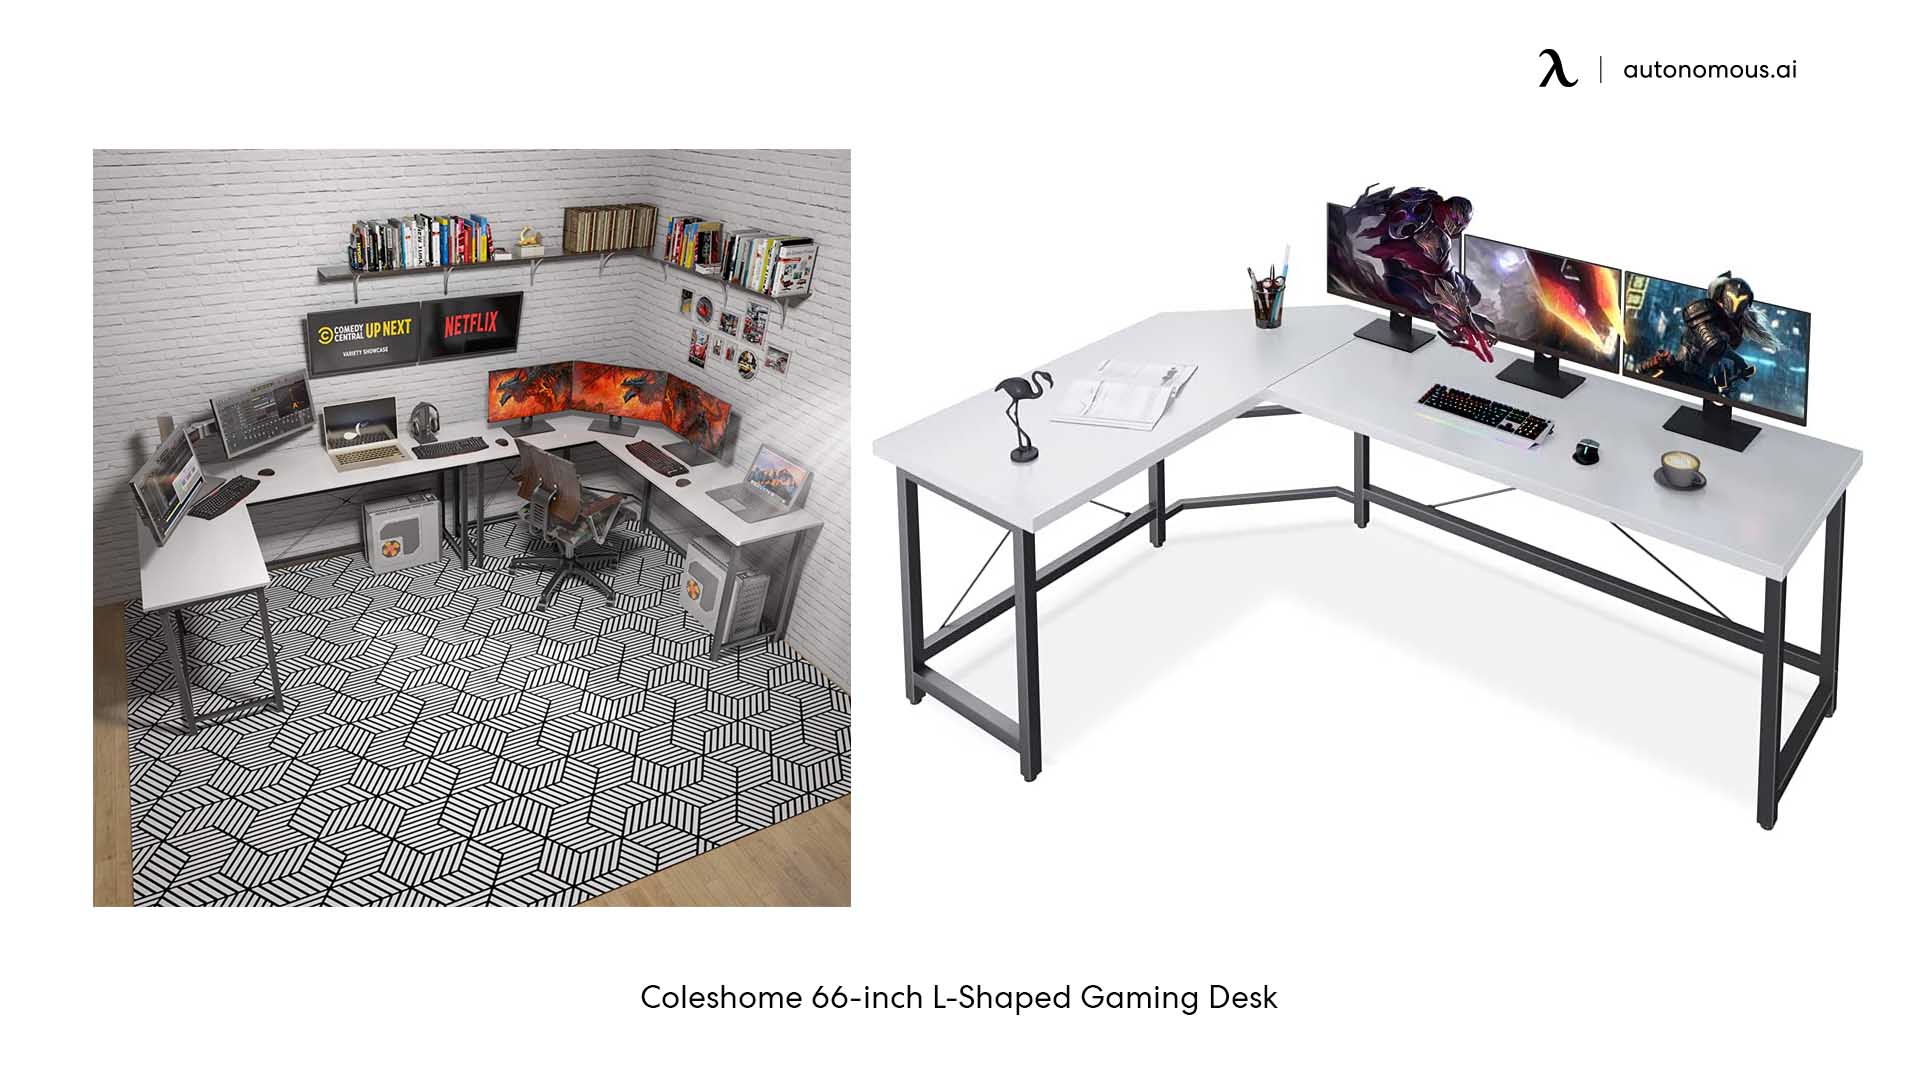 Coleshome 66-inch L-Shaped Gaming Desk